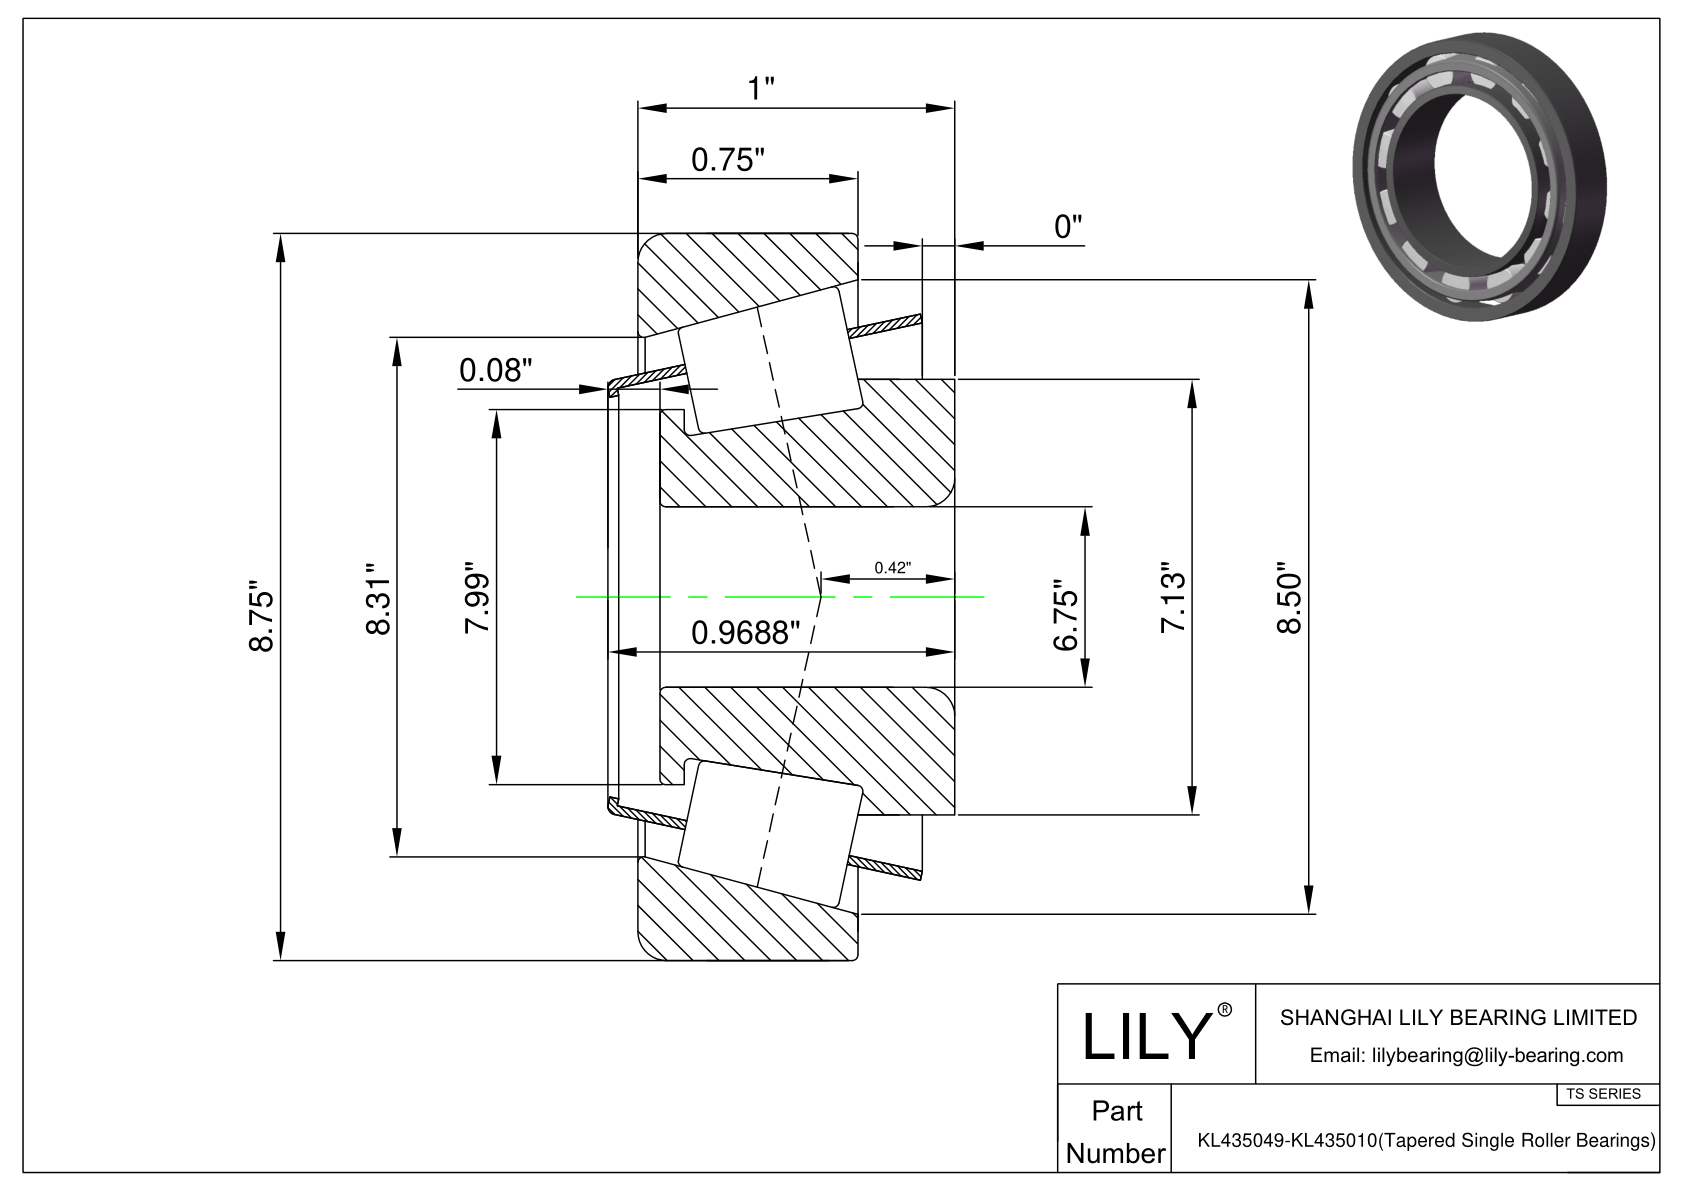 KL435049-KL435010 TS (Tapered Single Roller Bearings) (Imperial) cad drawing